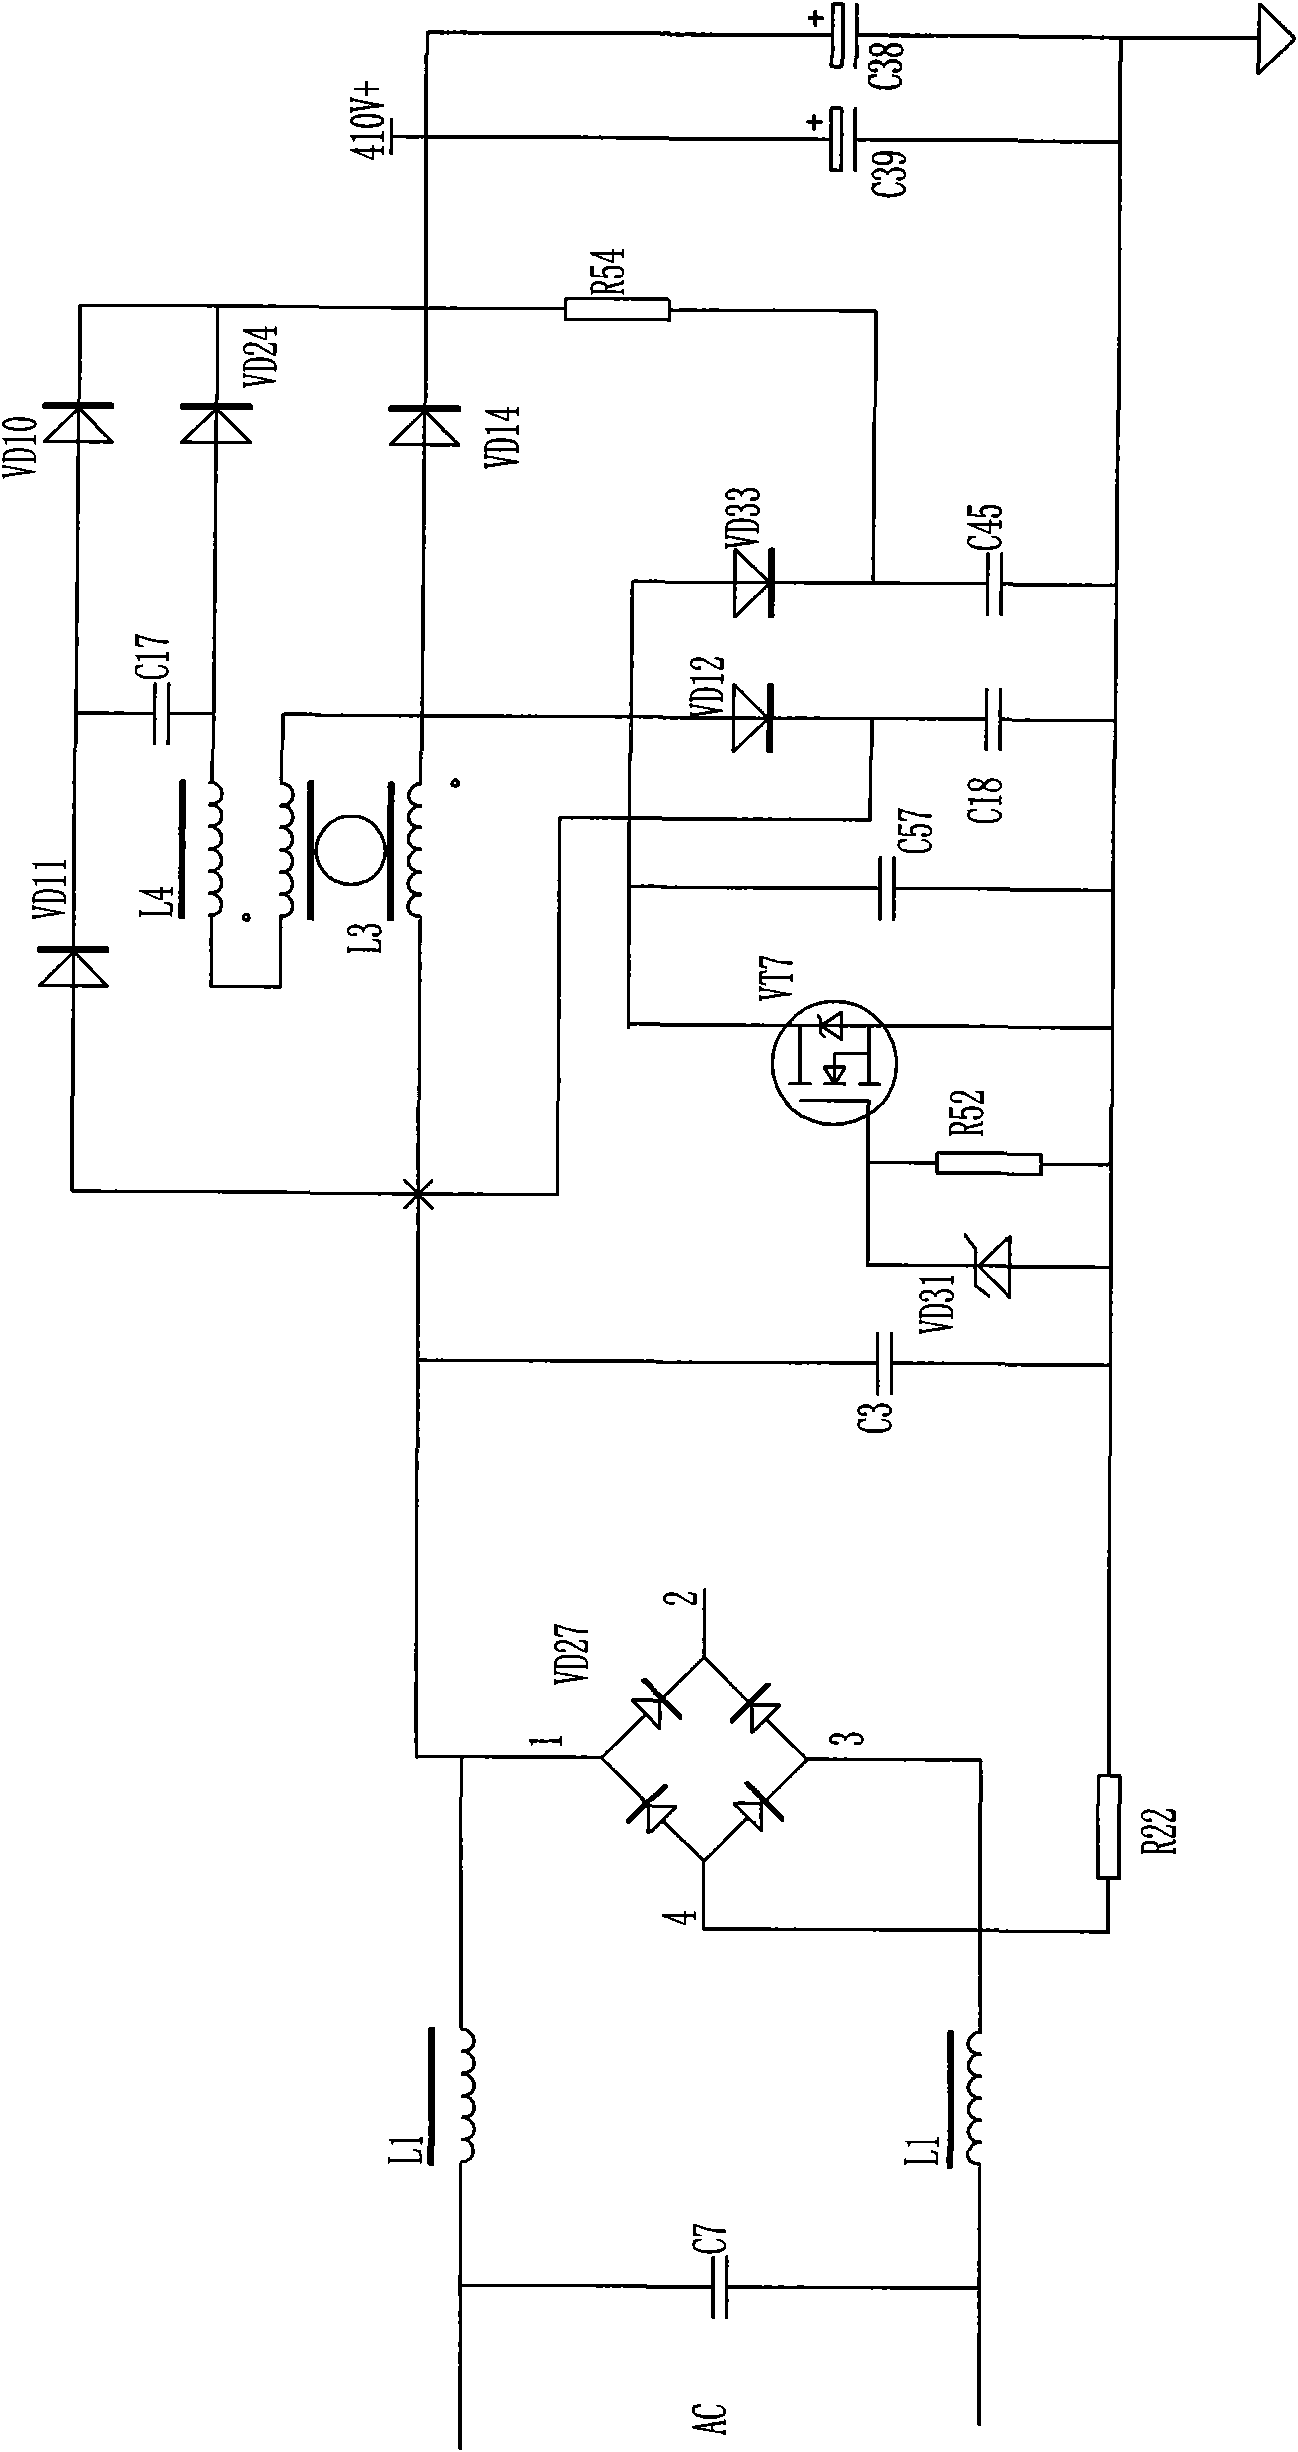 Grading limiting circuit for aerospace alternative-current/direct-current (AC/DC) converter